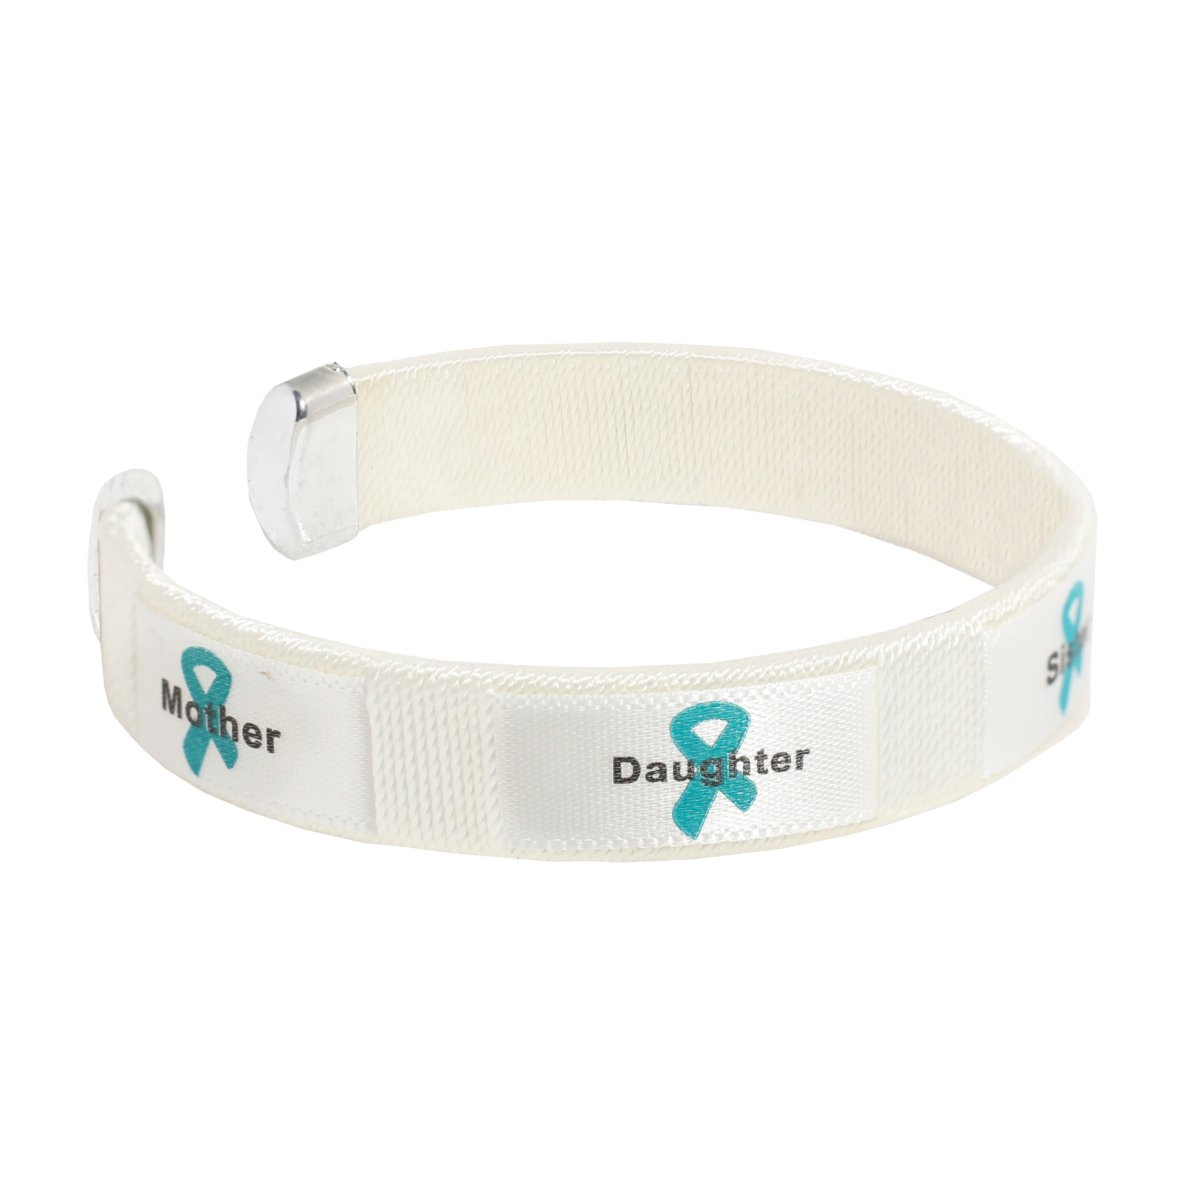 Mother Daughter Ovarian Cancer Bangle Bracelets - Fundraising For A Cause